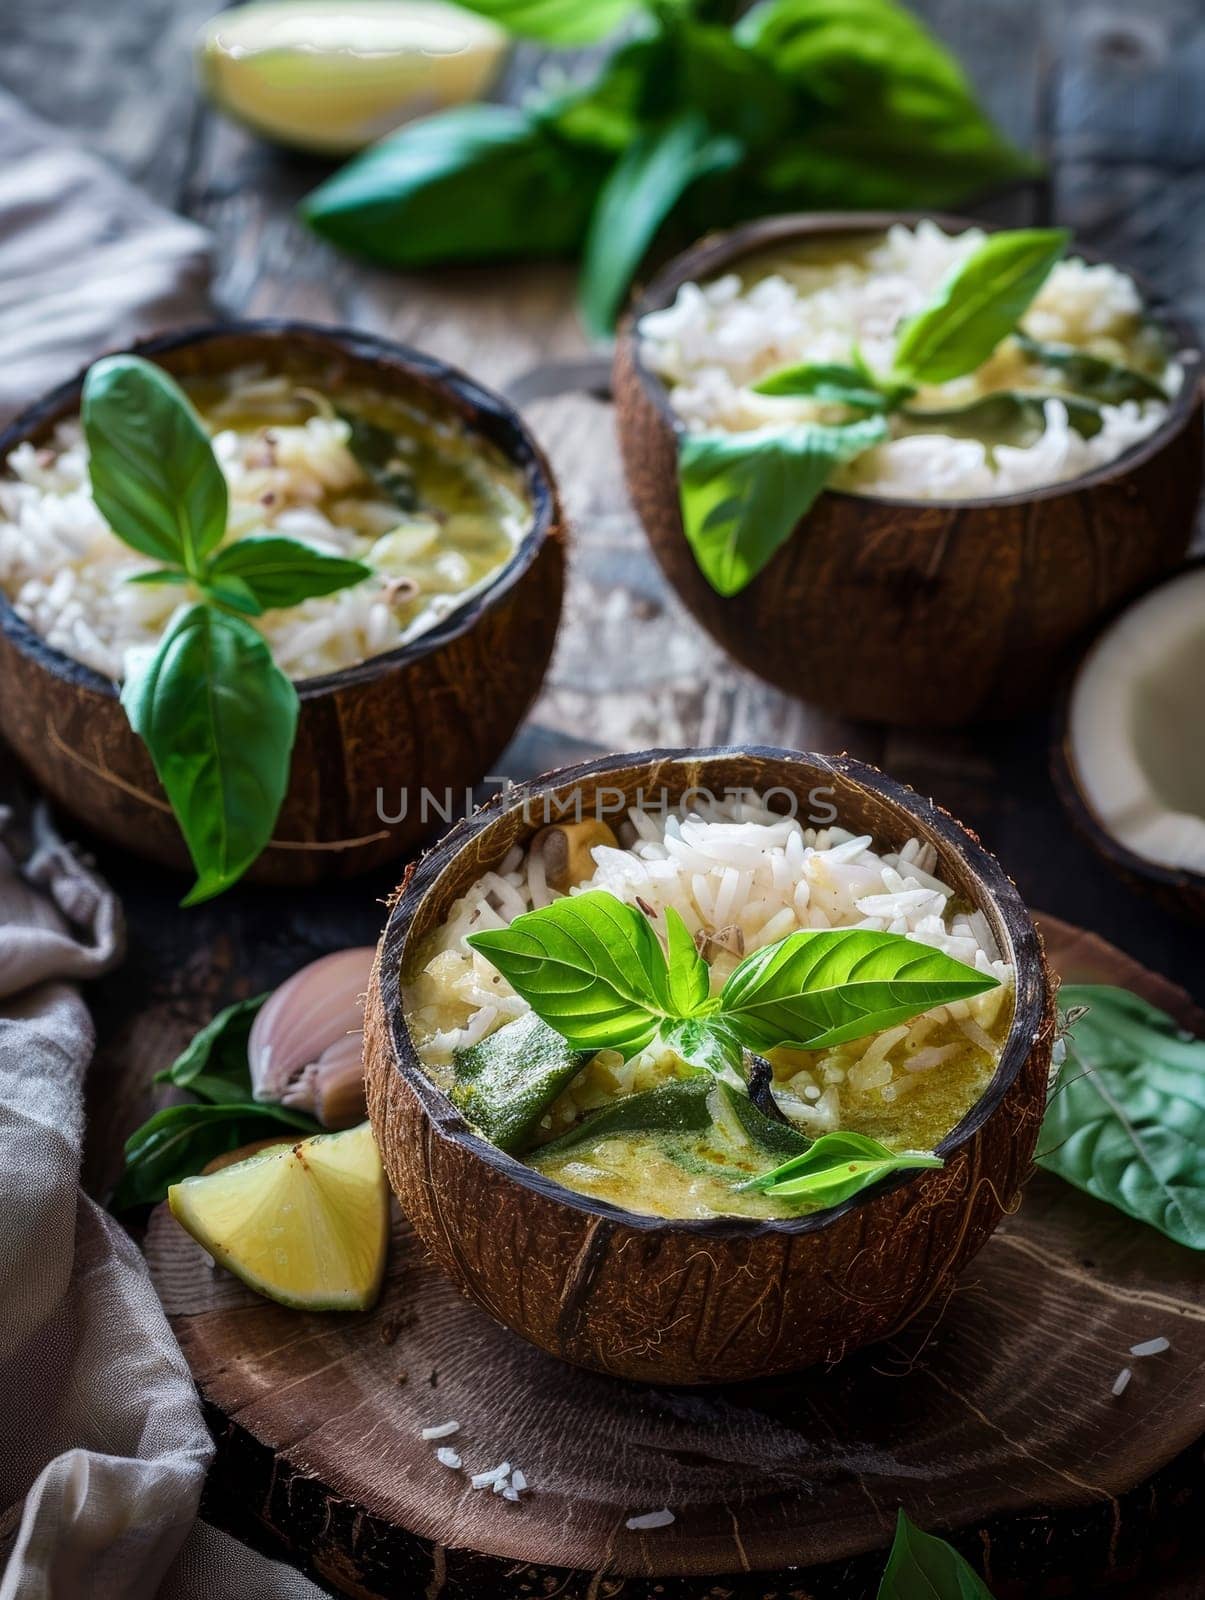 Authentic Thai green curry, served in a hollowed-out coconut shell alongside fluffy jasmine rice and fresh basil leaves - a fragrant, spicy, and creamy representation of traditional Thai culinary